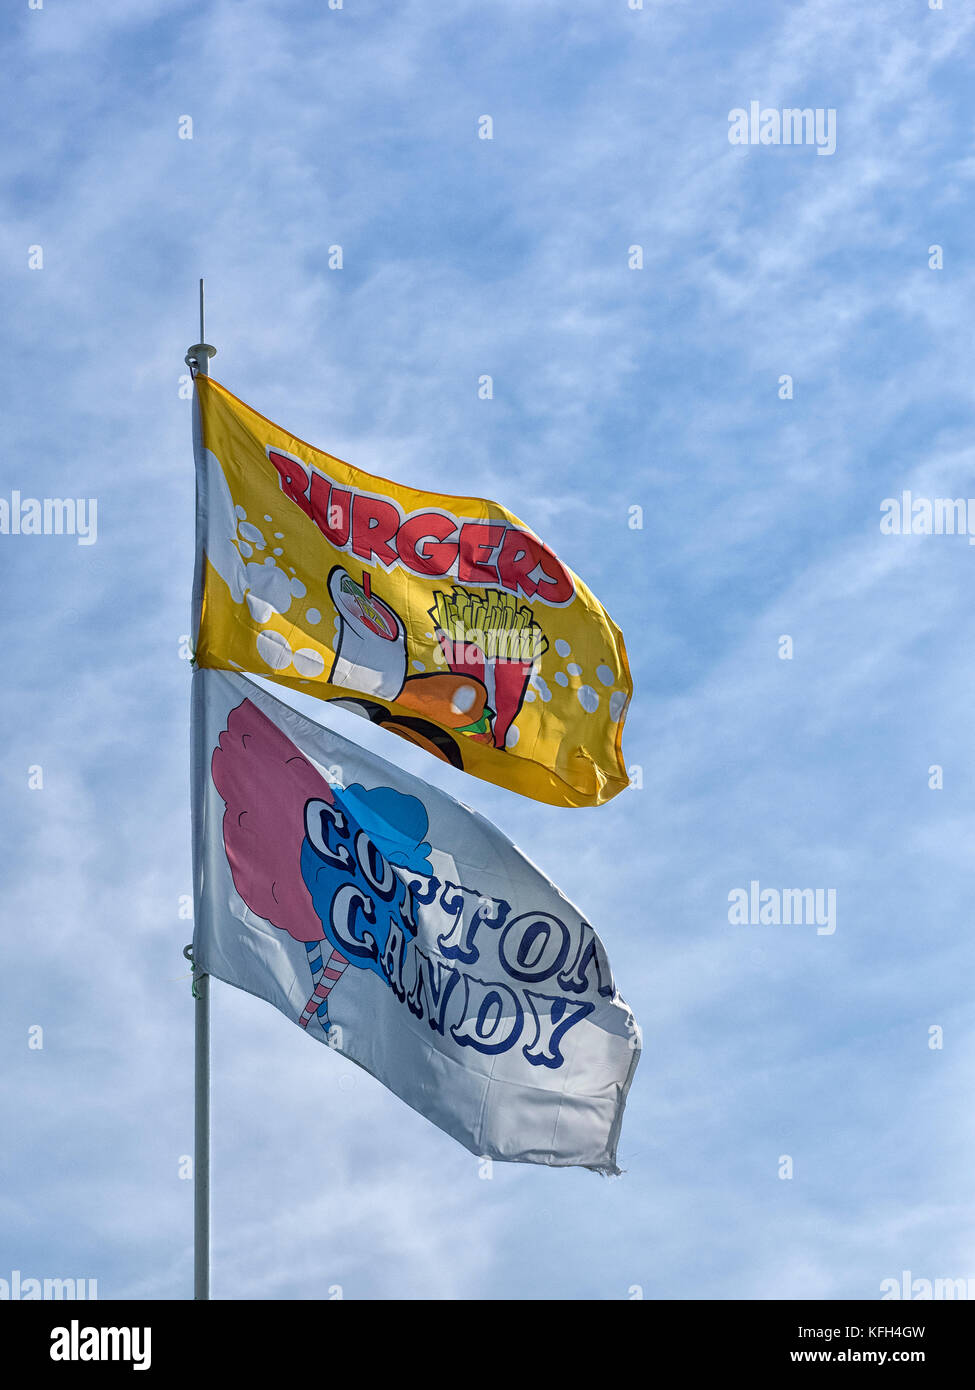 SOUTHEND-ON-SEA, ESSEX, UK - AUGUST 28, 2017:   Advertising Flags flying above beachfront kiosk selling burgers and cotton candy Stock Photo